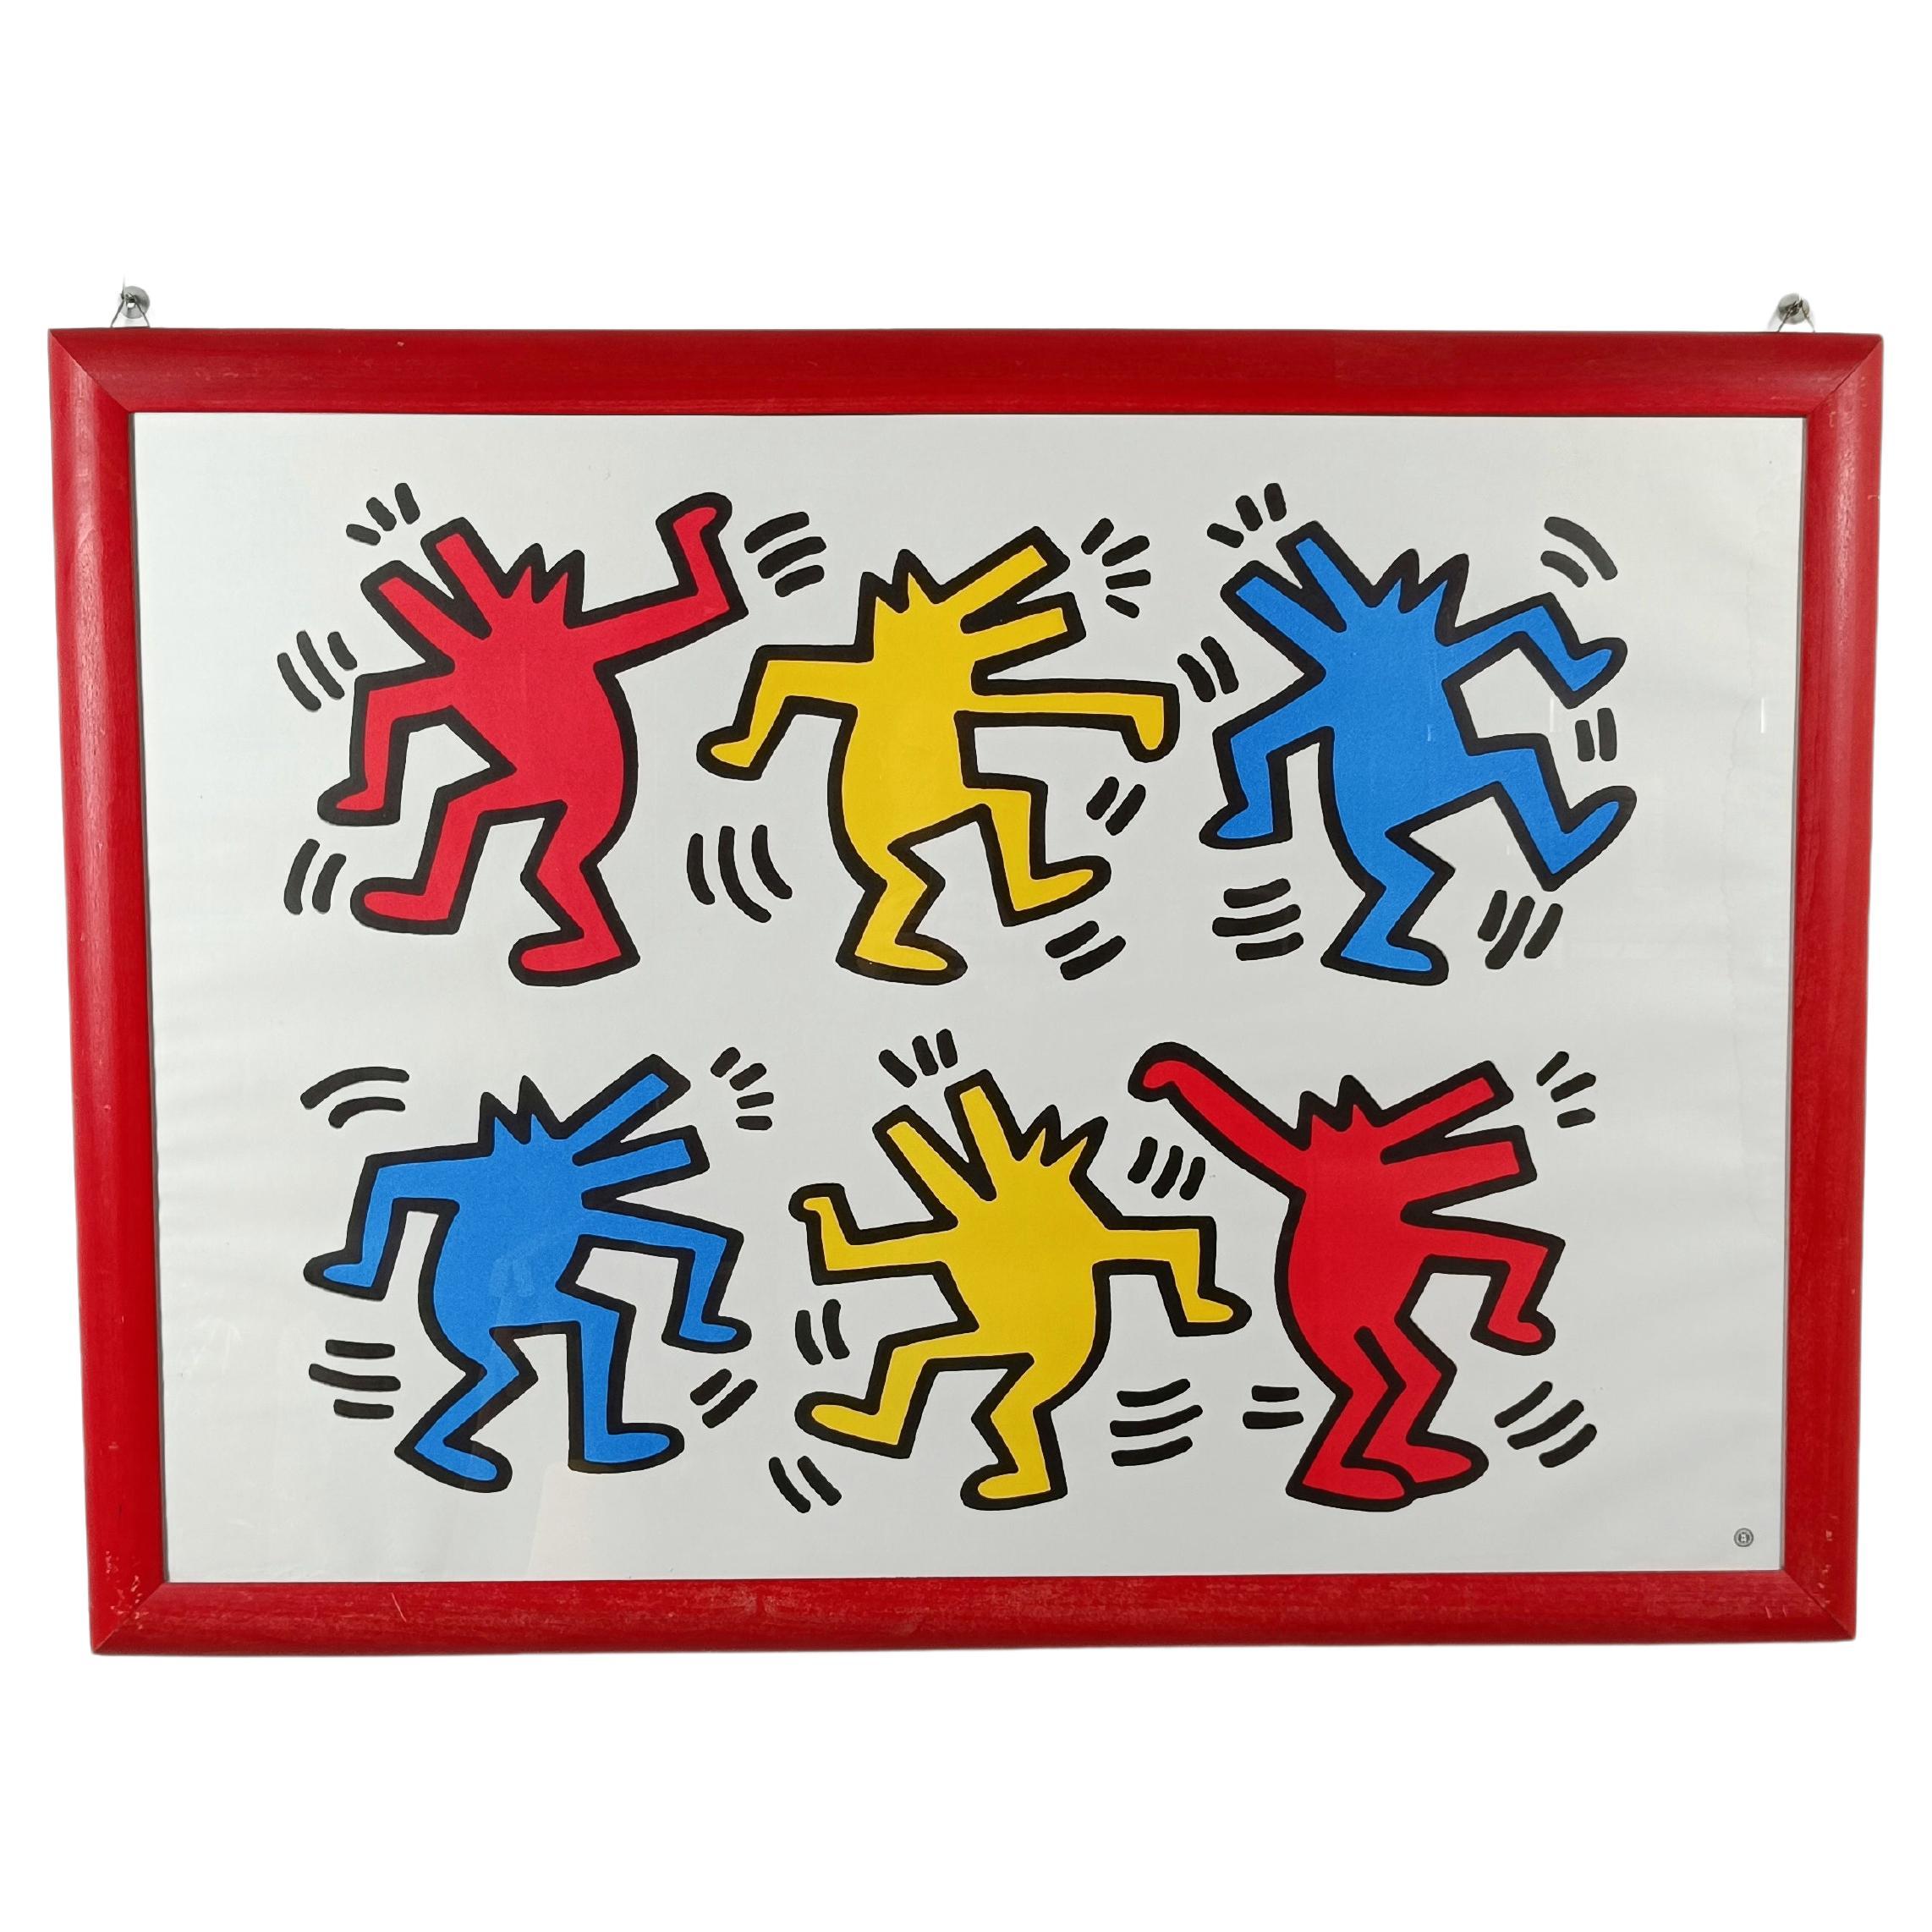 Keith Haring Poster of Dancing Dogs Printed in France by Nouvelles Imeges S.A. 